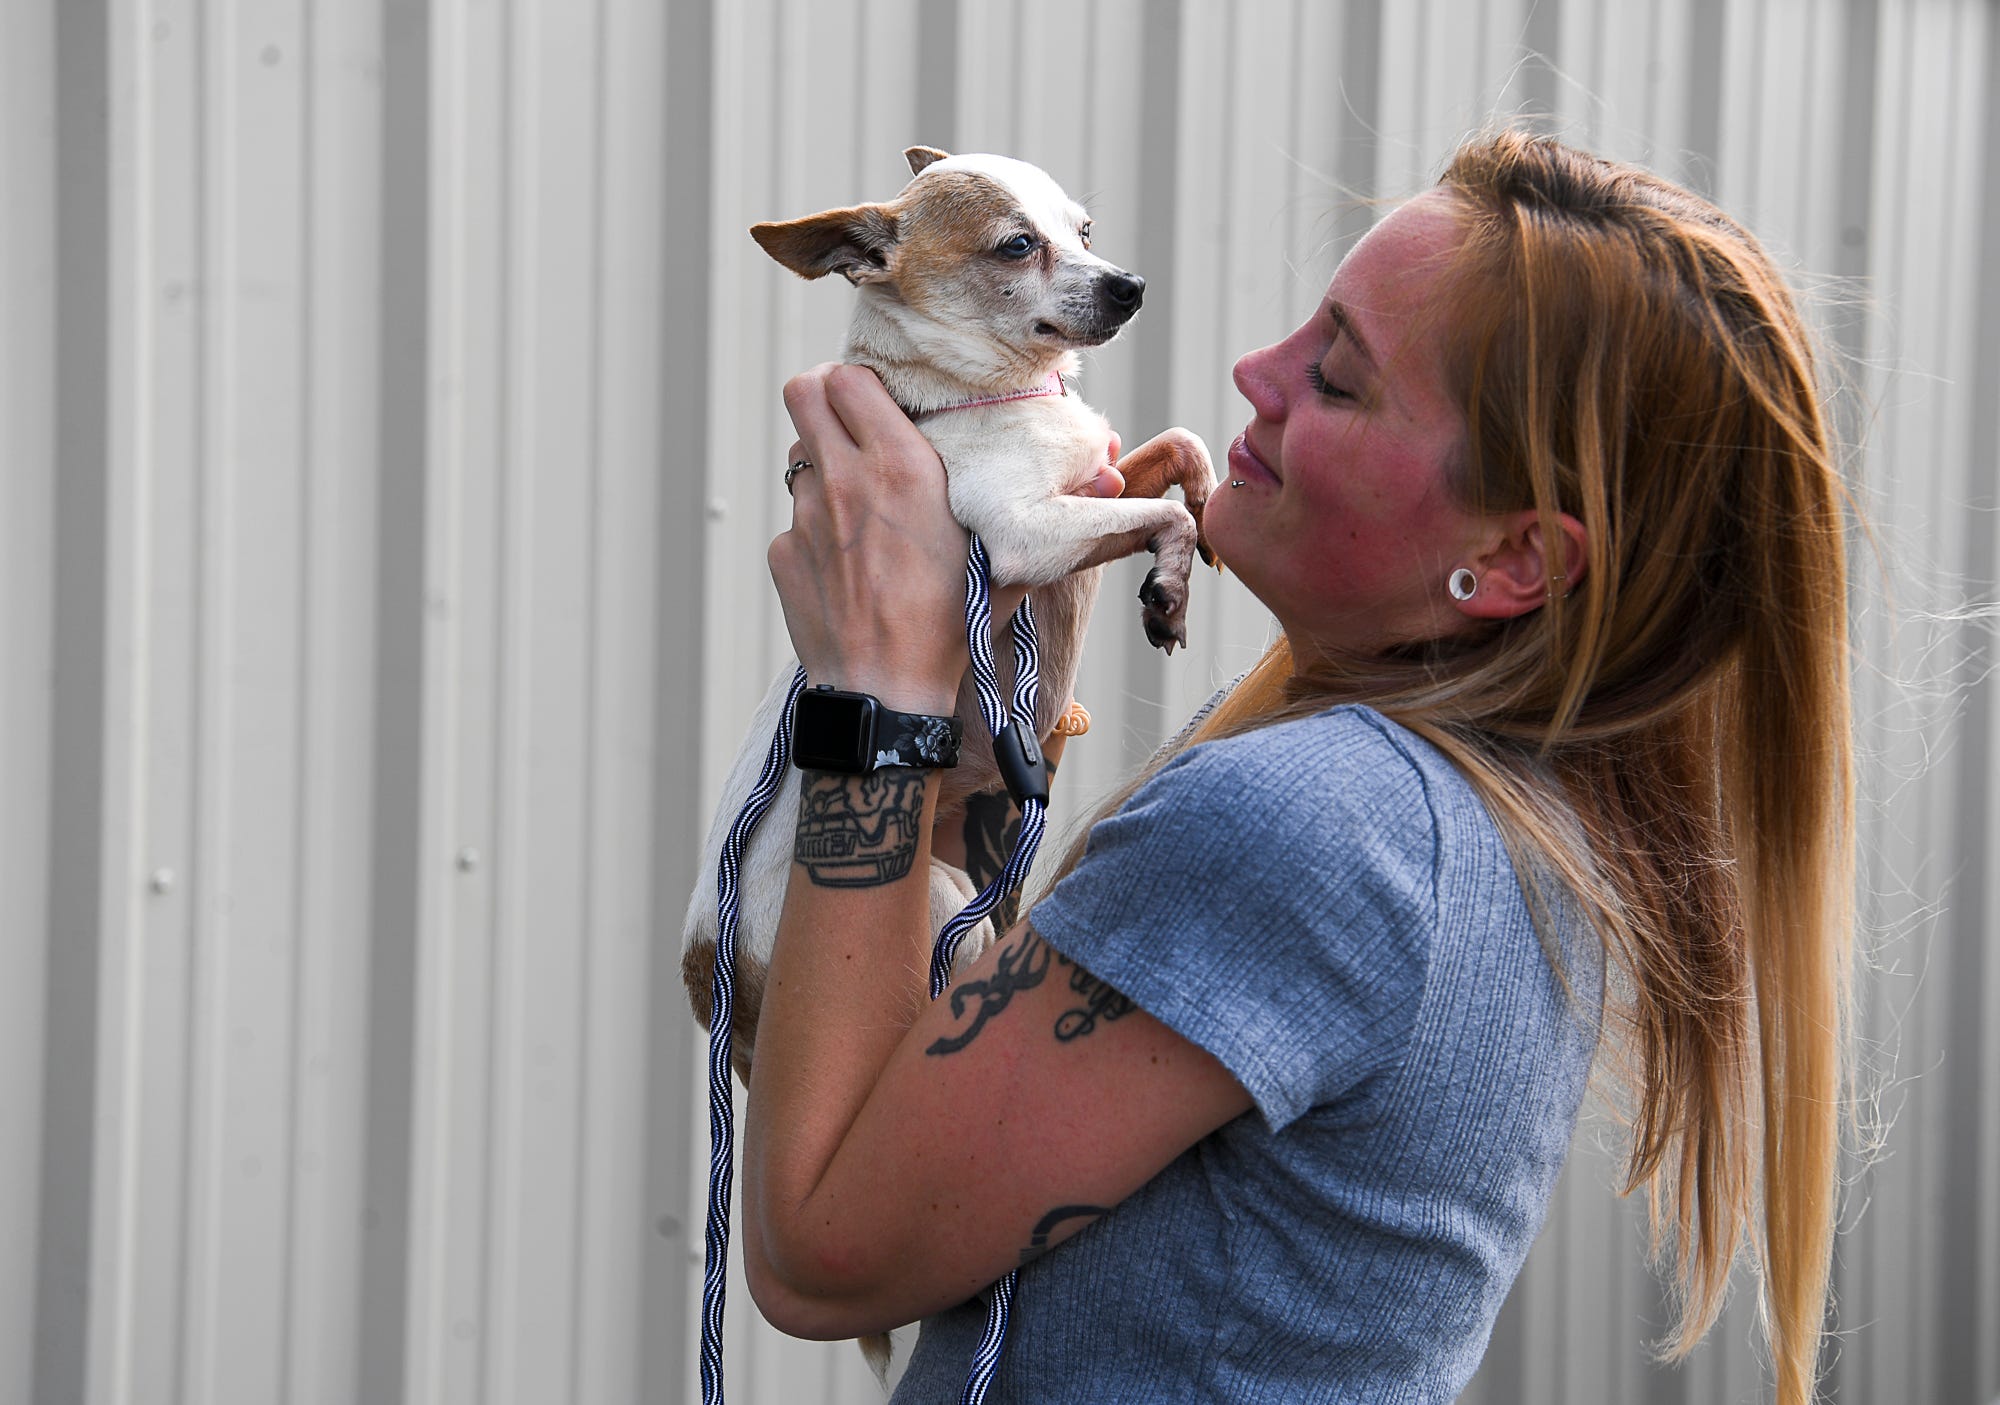 Alexis Regula is reunited with her dog Lucy who she lost nine years ago while living in Tennessee, Thursday, September 10, 2020.
John A. Pavoncello photo